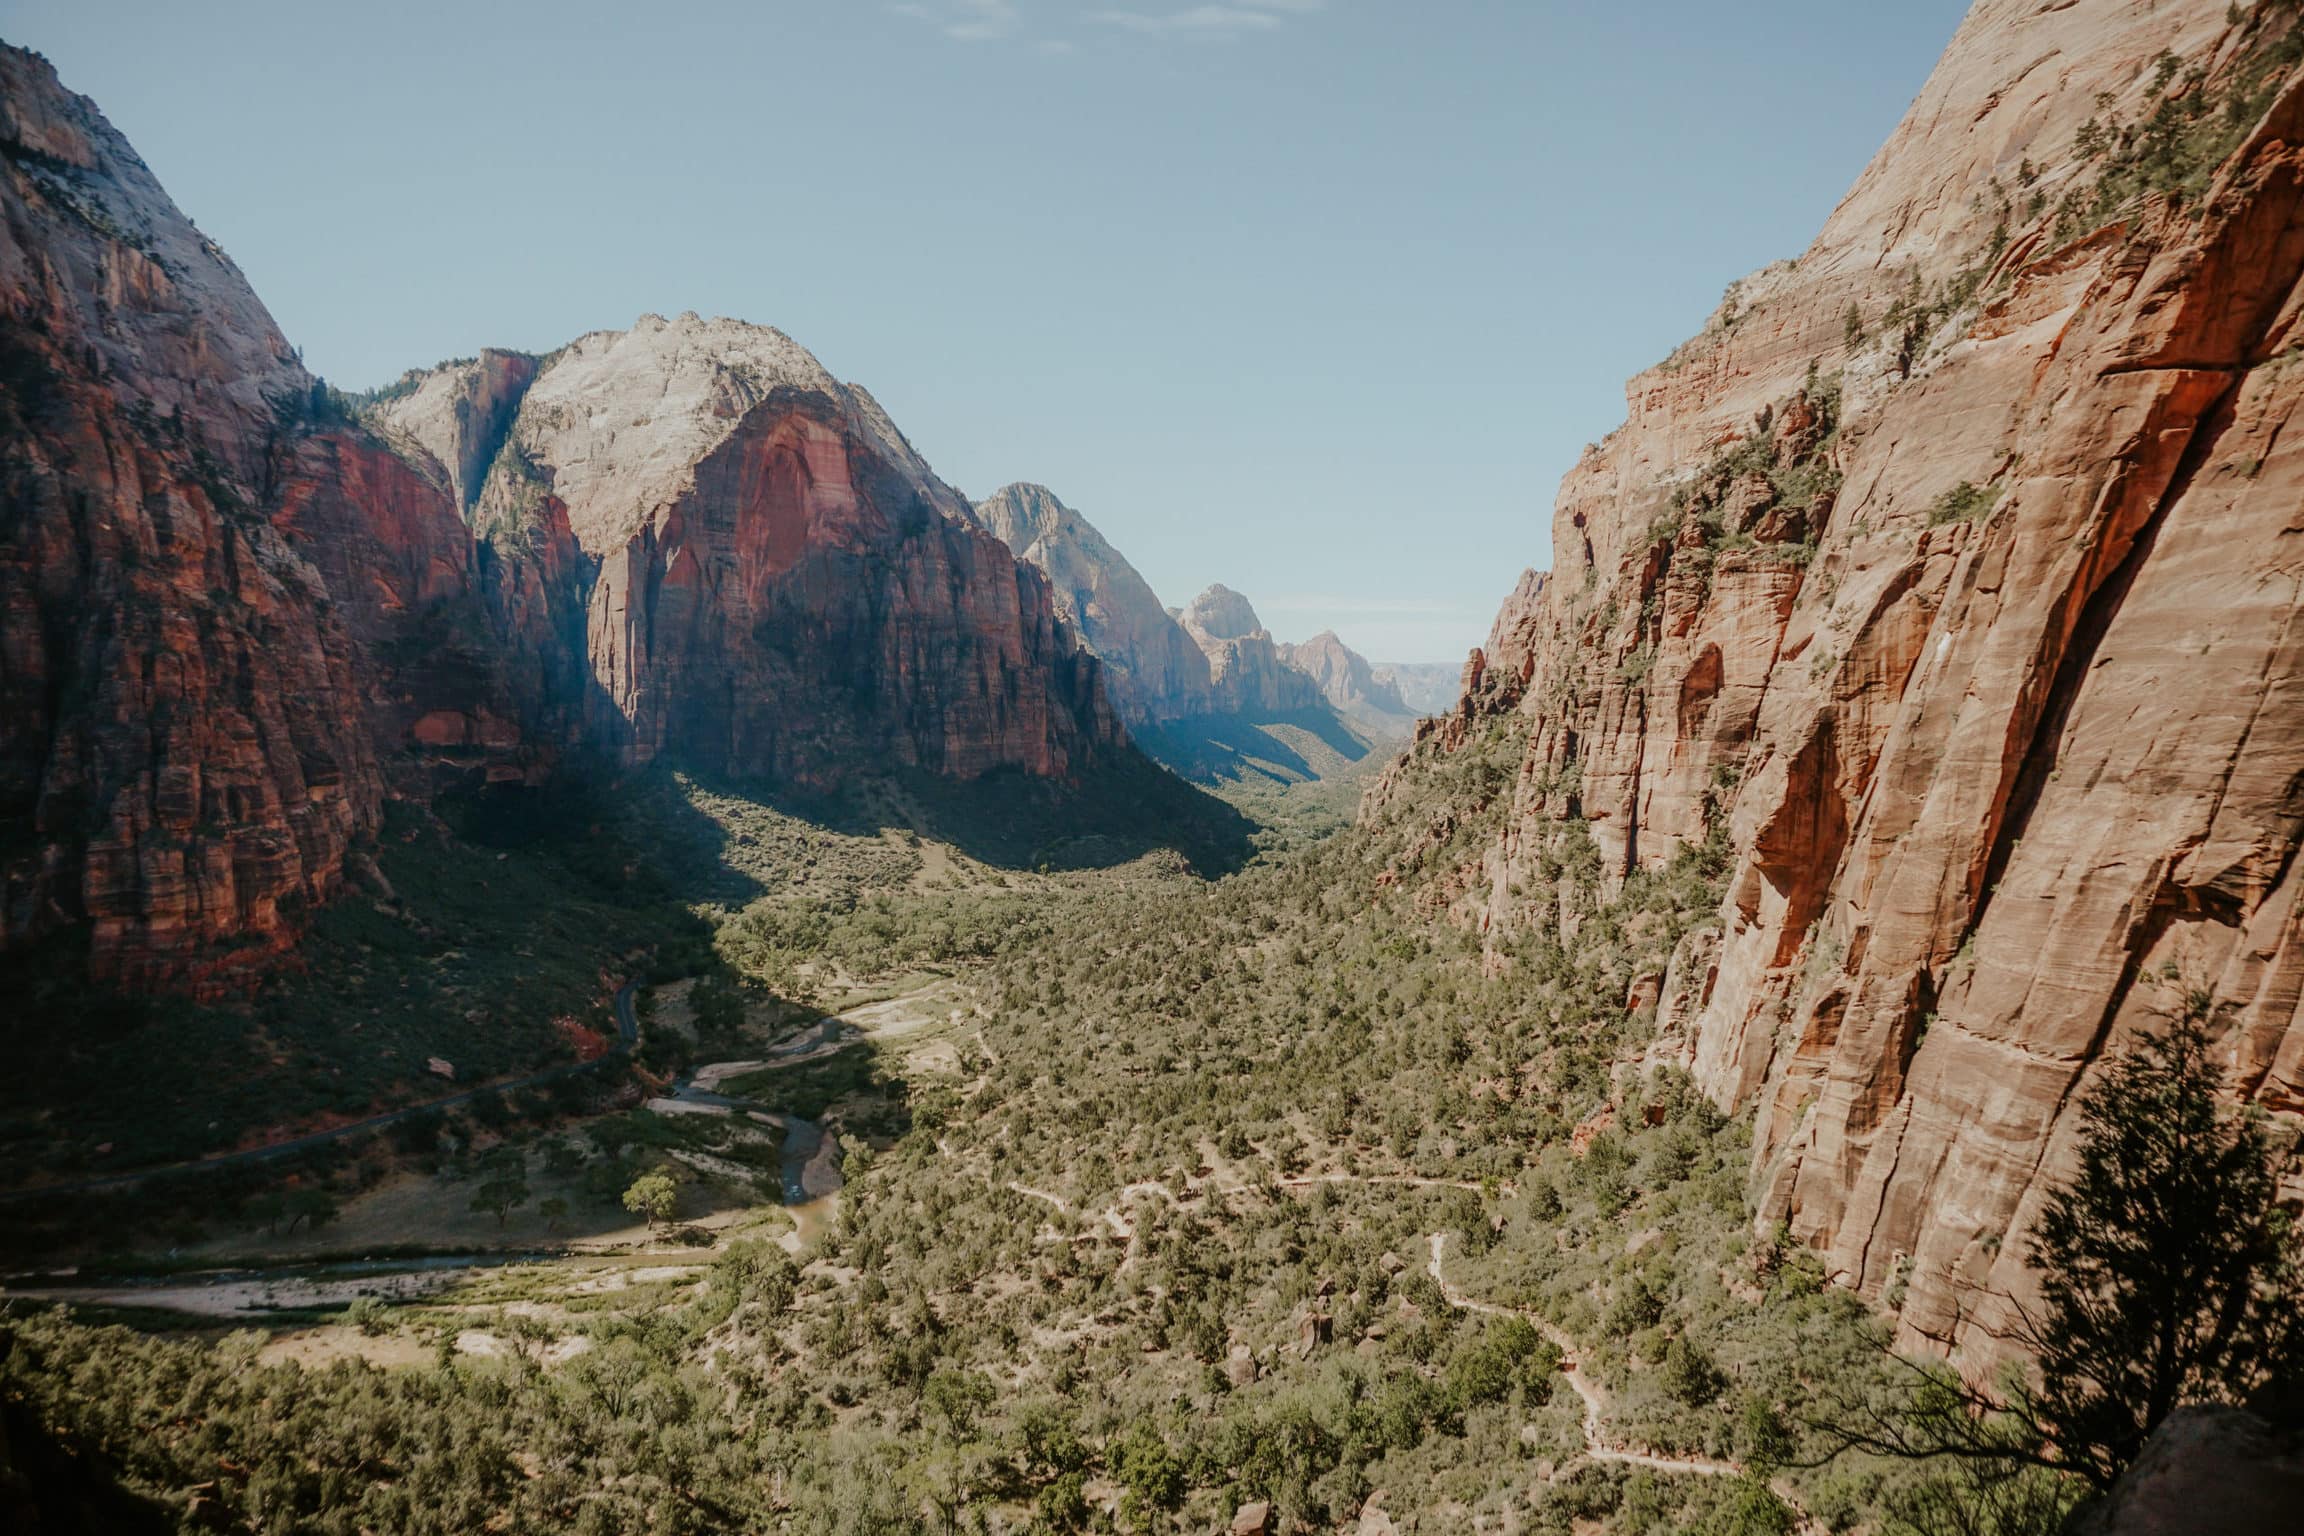 The breathtaking view from the top of Angels Landing in Zion National Park